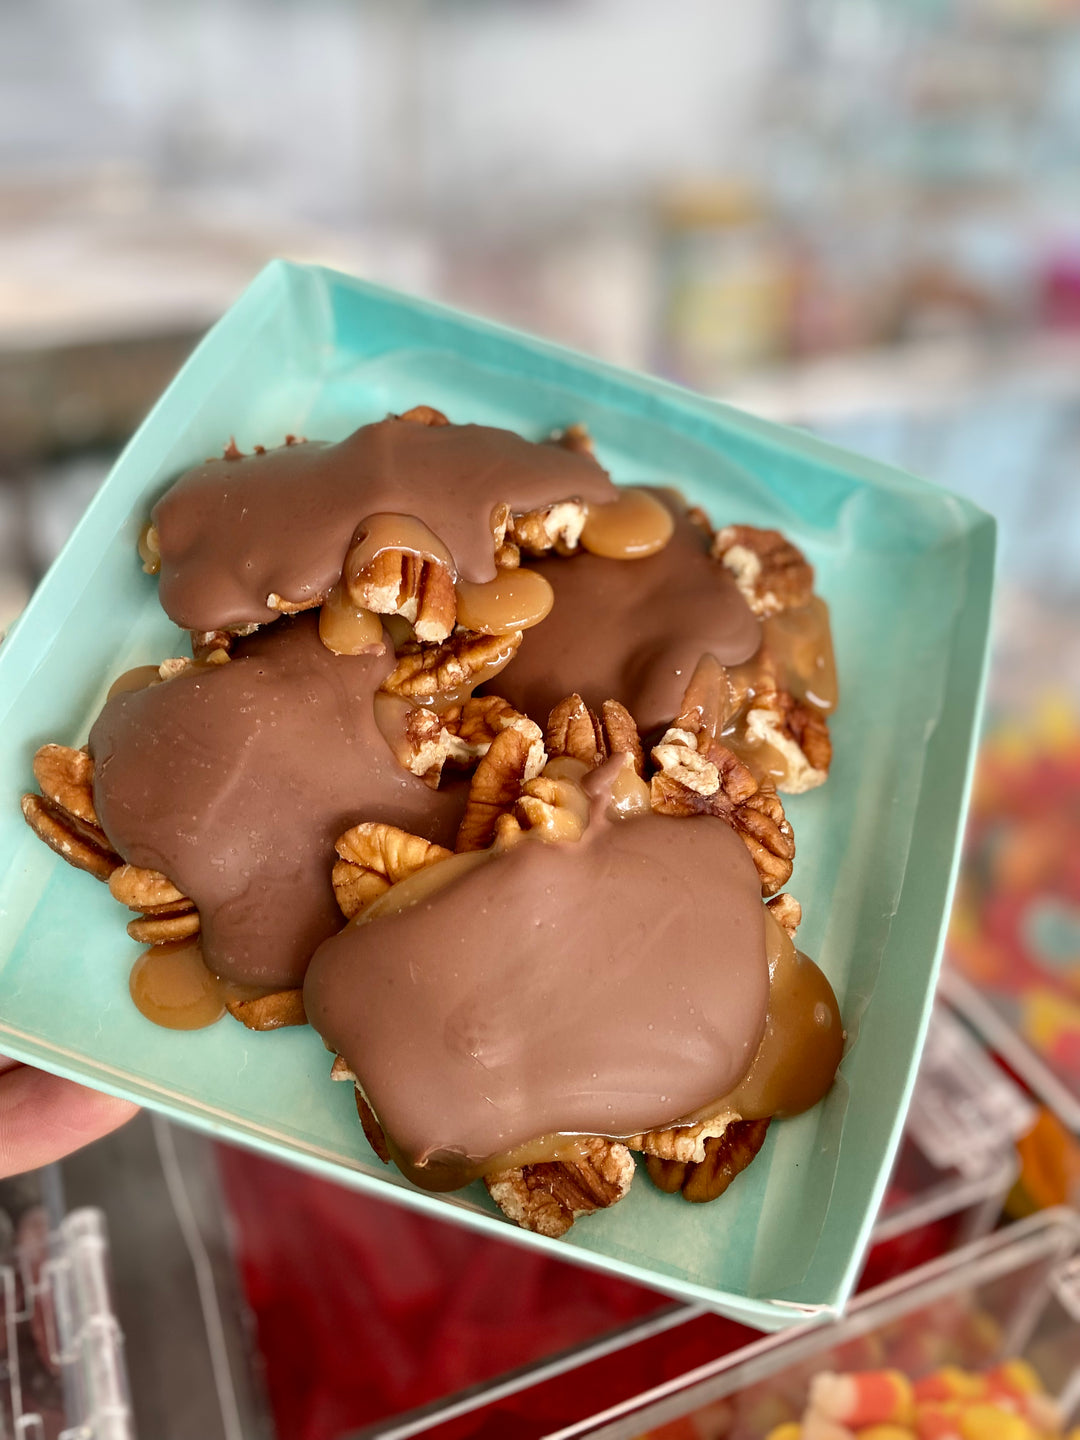 Milk Chocolate Pecan Turtles made by Nantasket Sweets in a gift box